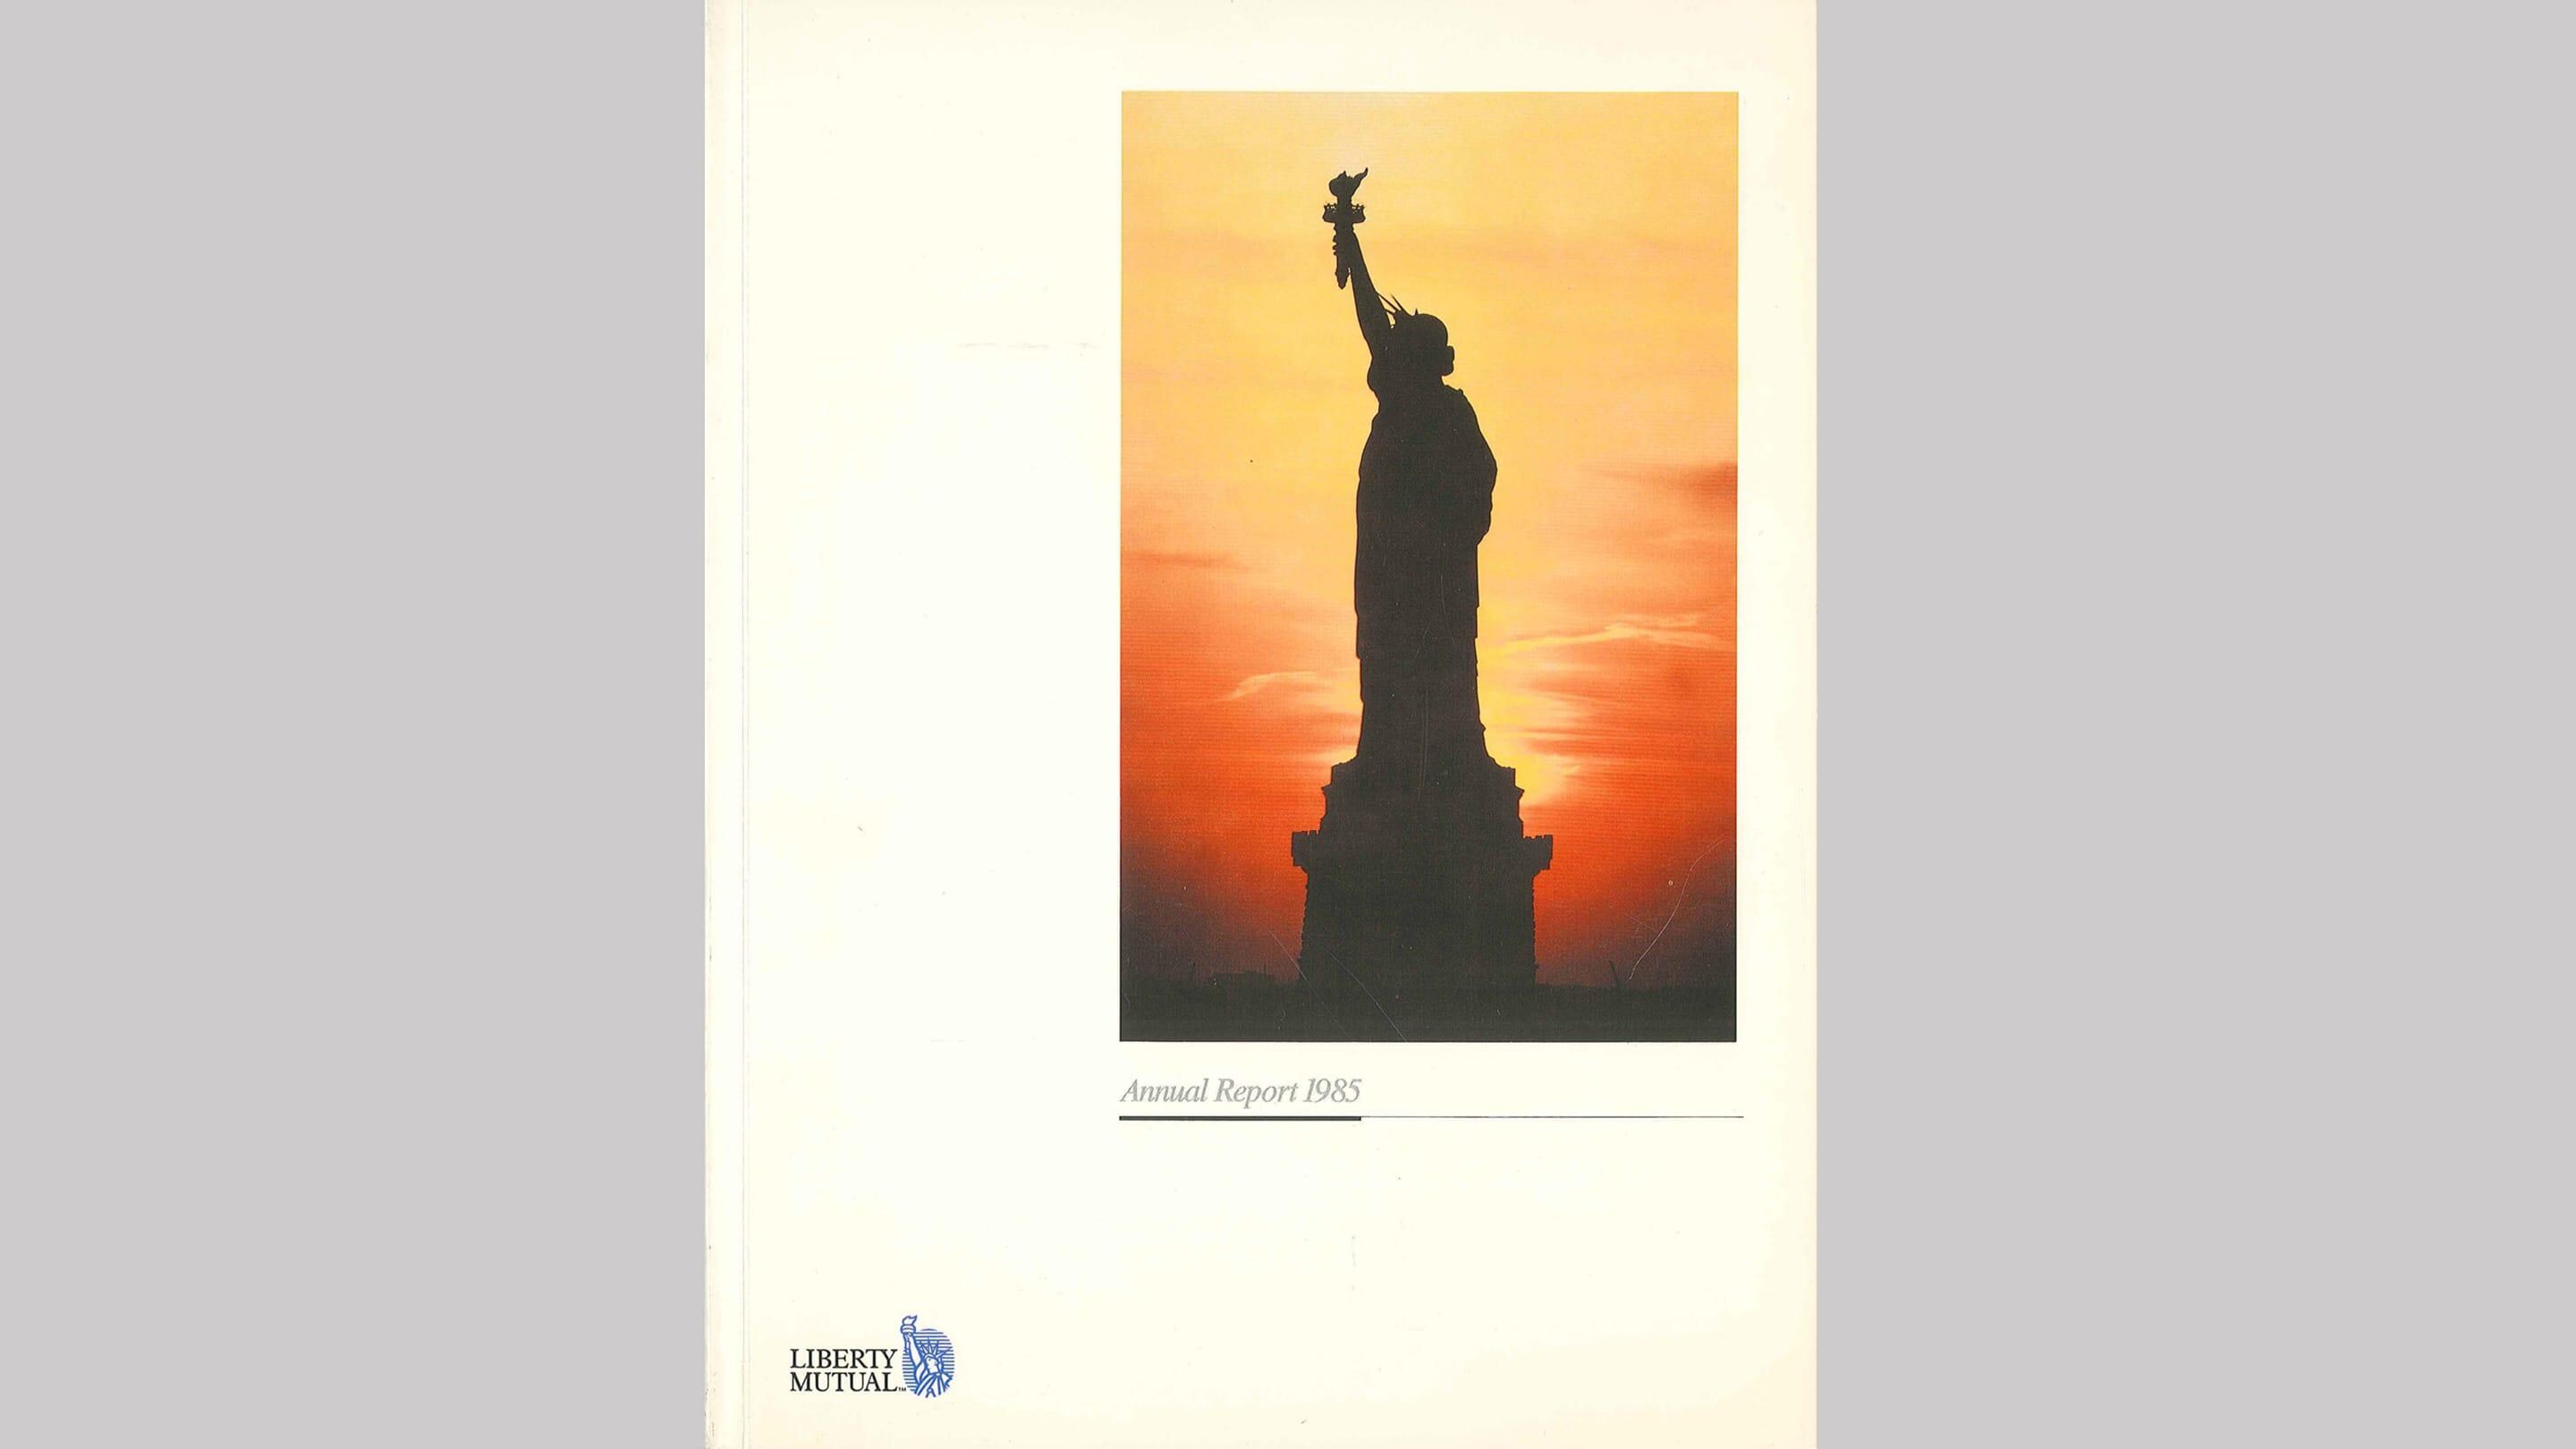 (slide 9 of 12) A 1985 annual report cover by Liberty Mutual Insurance . 